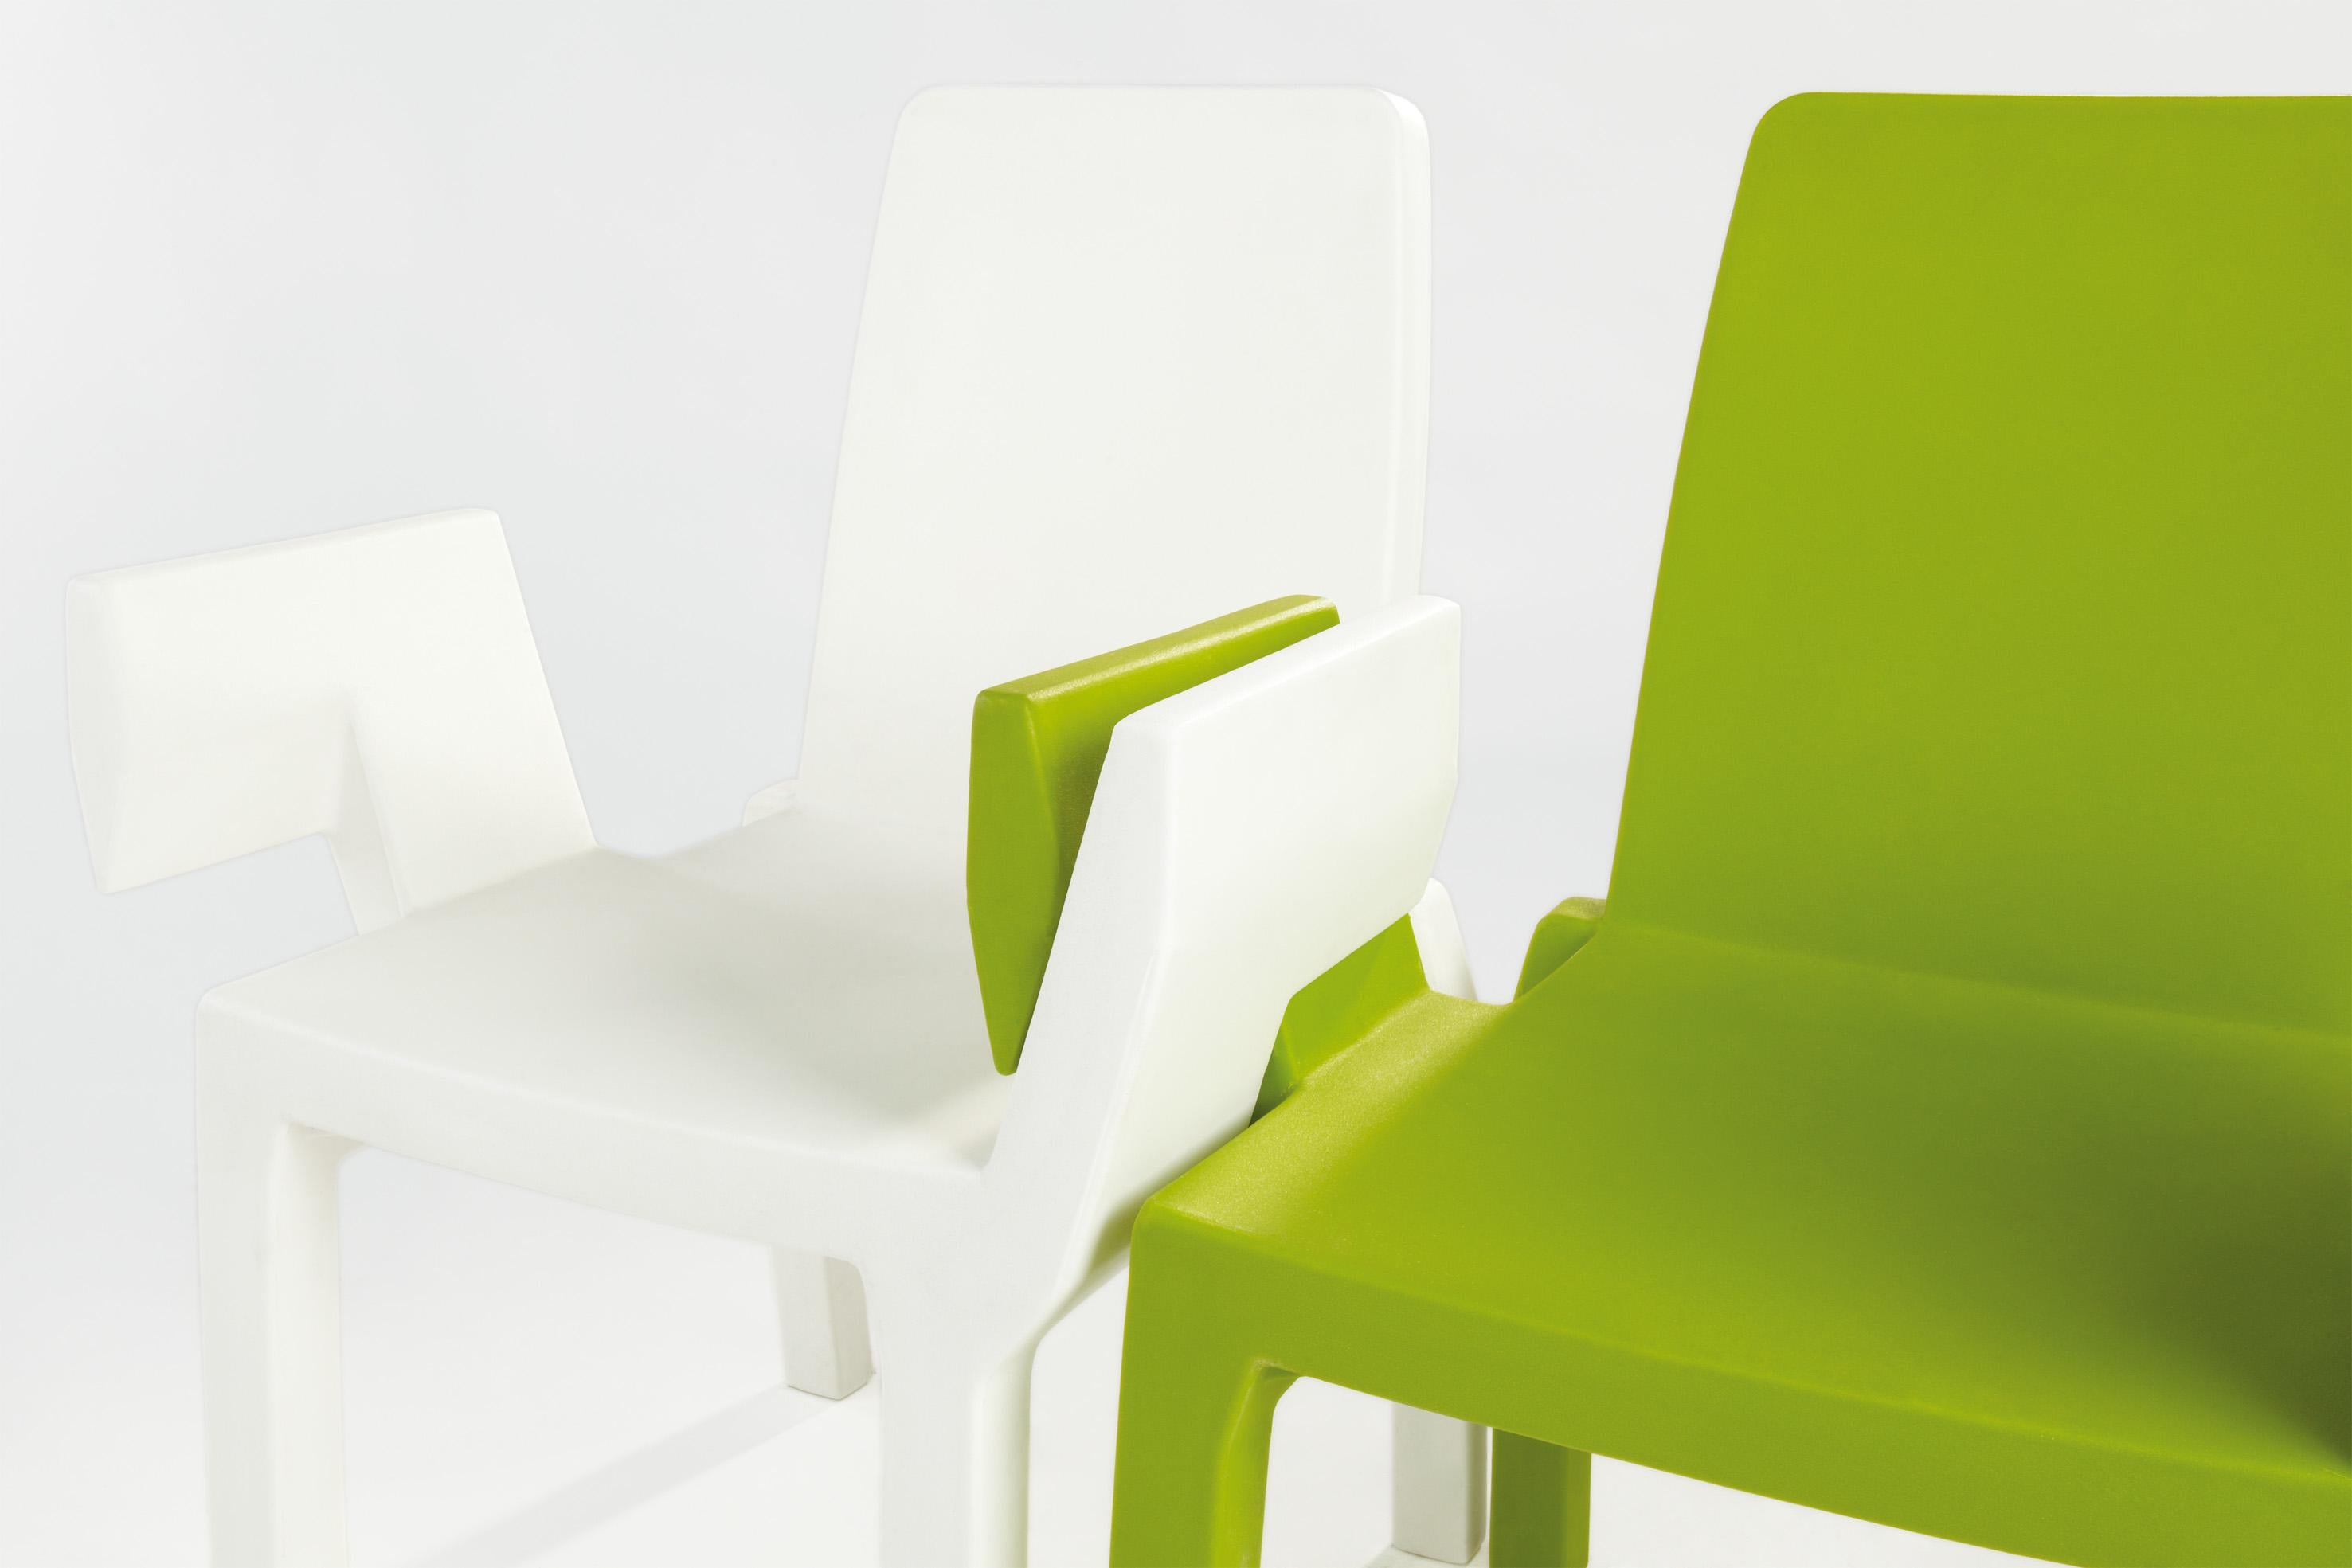 Milky White Doublix Chair by Stirum Design
Dimensions: D 57 x W 61 x H 88 cm. Seat Height: 43 cm.
Materials: Polyethylene.
Weight: 10 kg.

Available in different color options. This product is suitable for indoor and outdoor use. Stackable product.